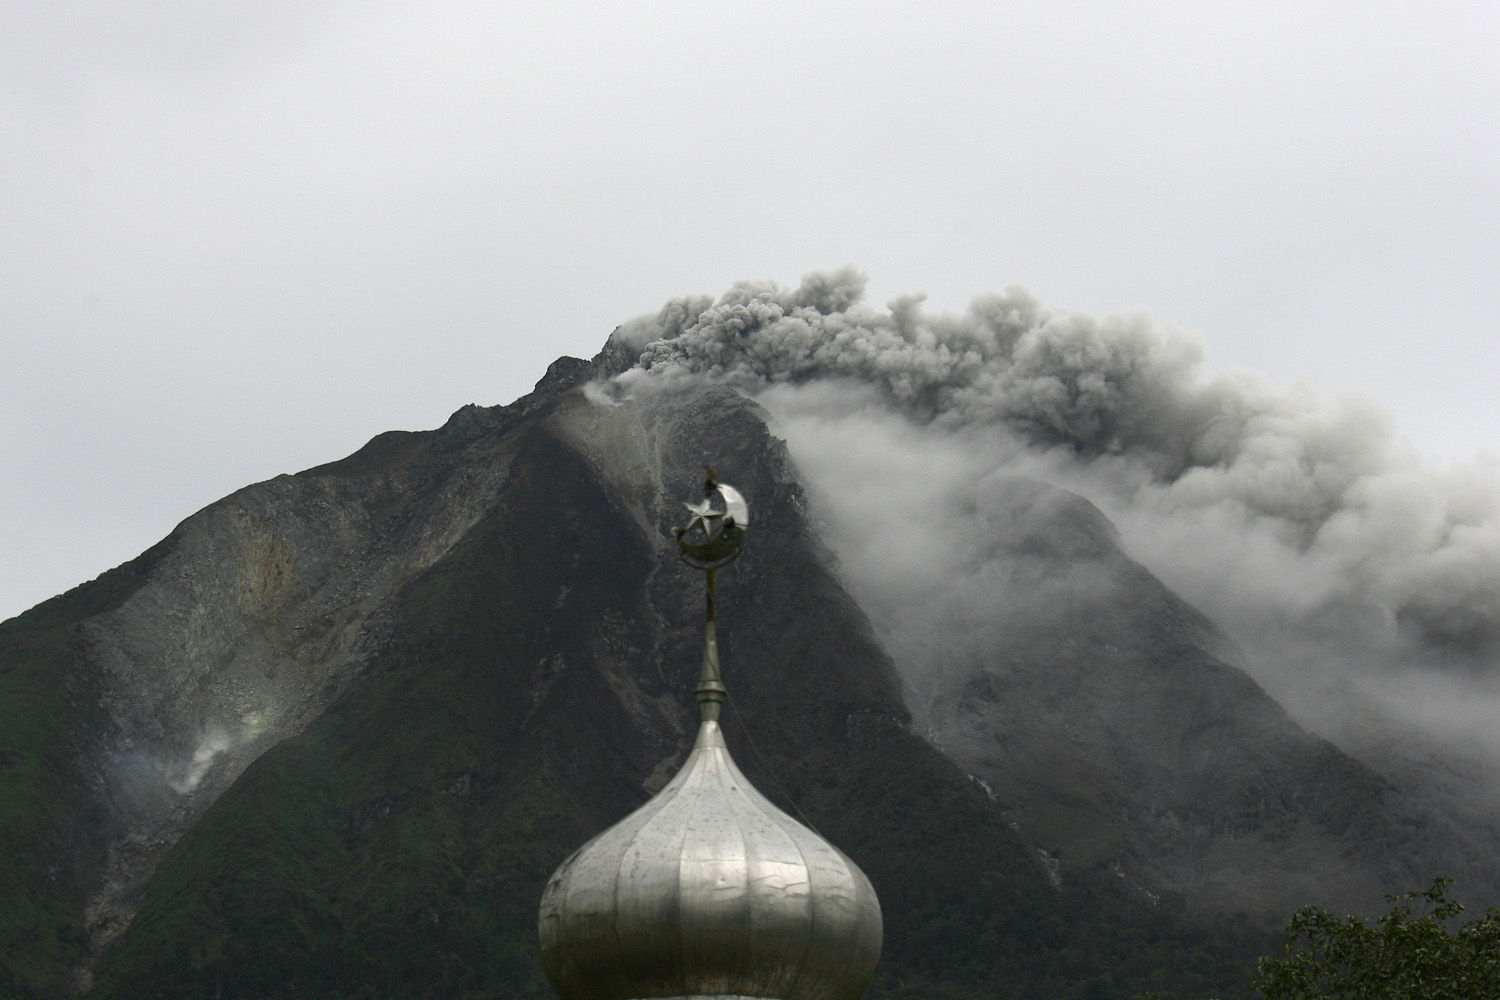 Mount Sinabung spews ash and hot lava as it erupts near a mosque in Karo district, Indonesia's north Sumatra province